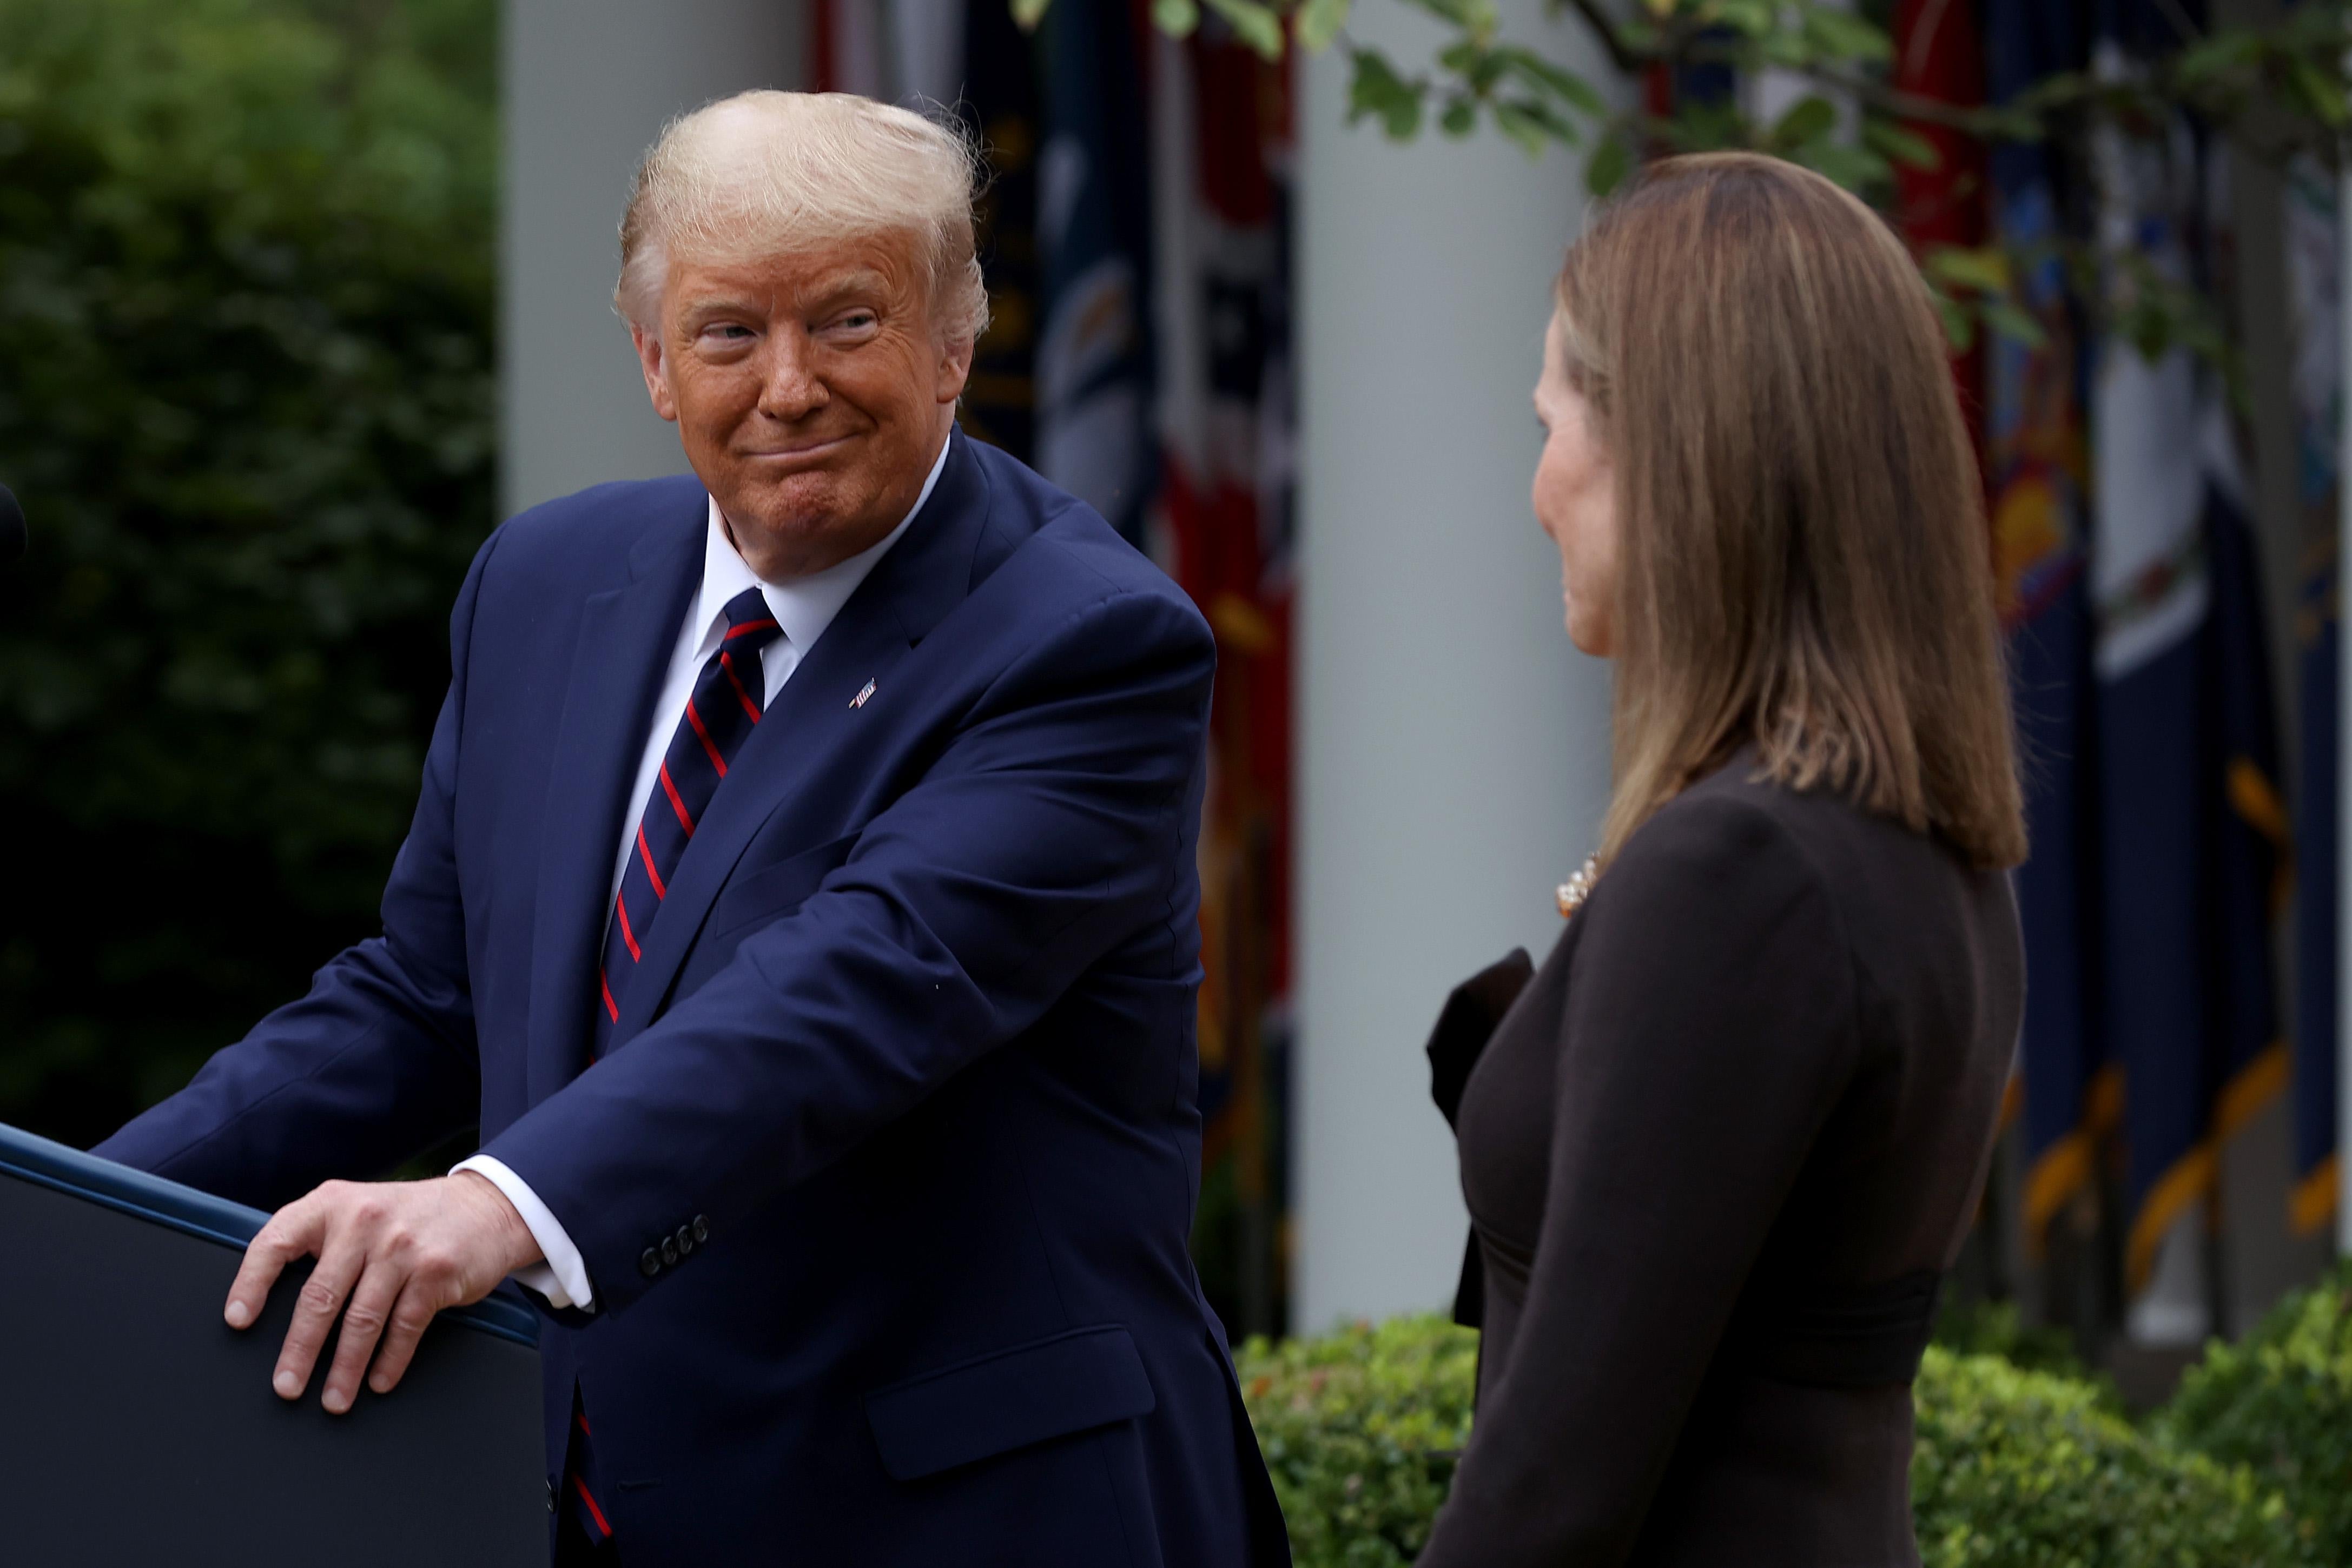 Donald Trump looks at Amy Coney Barrett as he nominates her to serve on the Supreme Court.